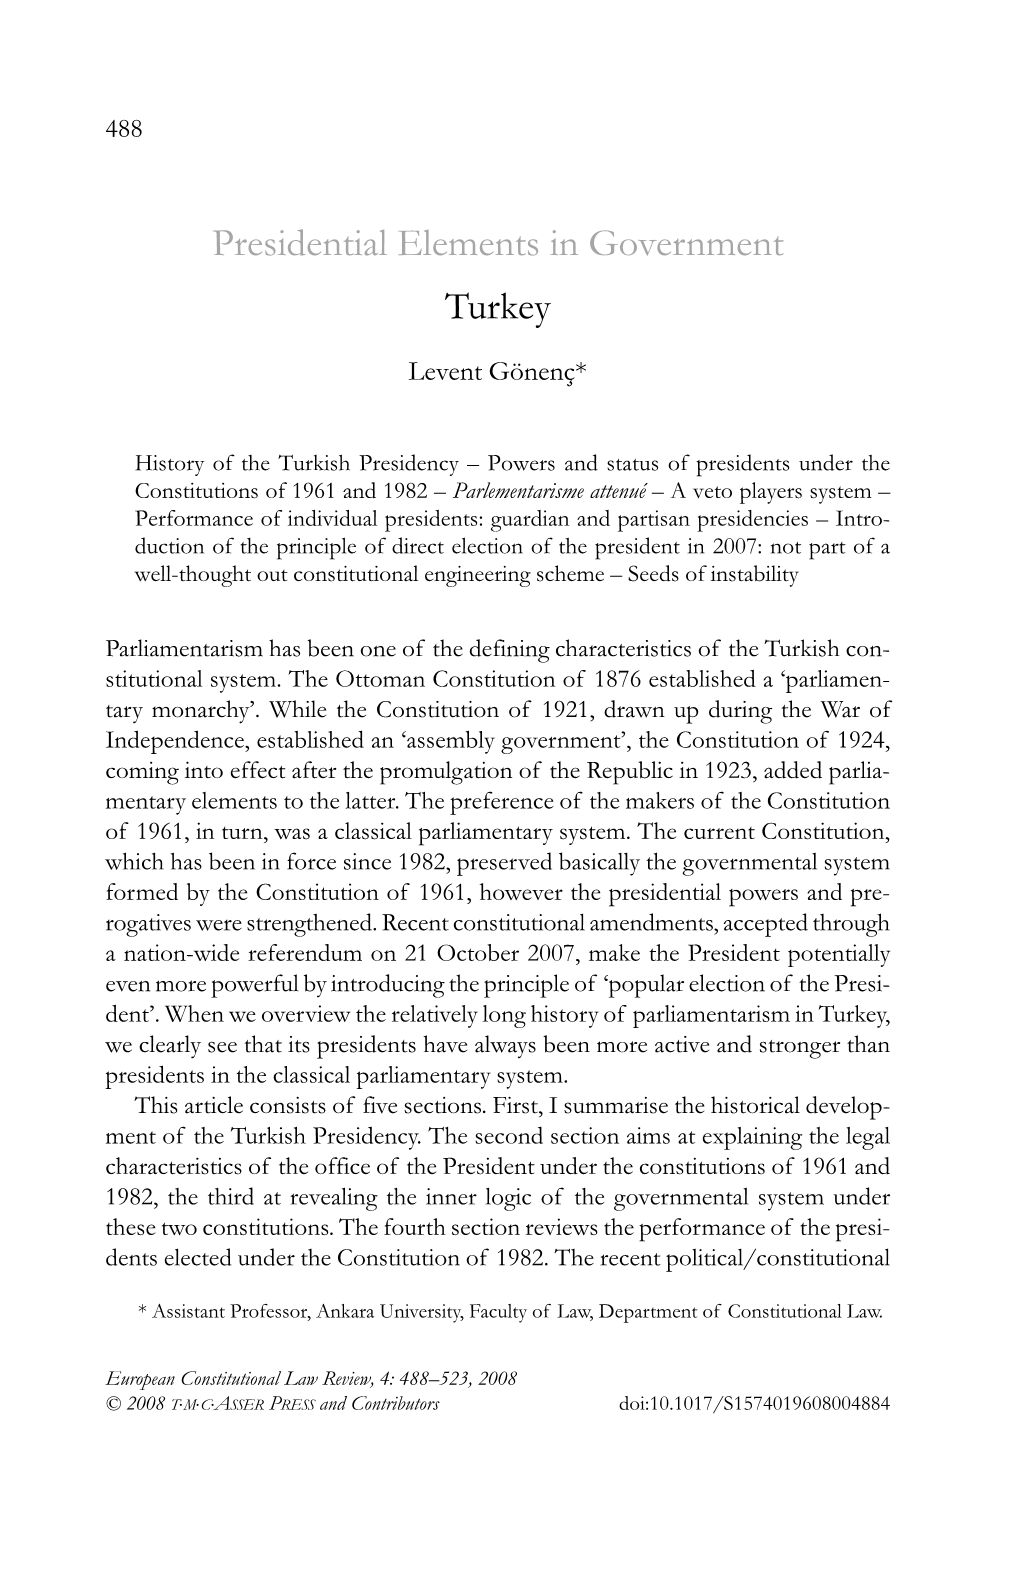 Presidential Elements in Government: Turkey 489 Crisis, Erupting During the Election of the Incumbent President Abdullah Gül, Is the Subject of the Last Section